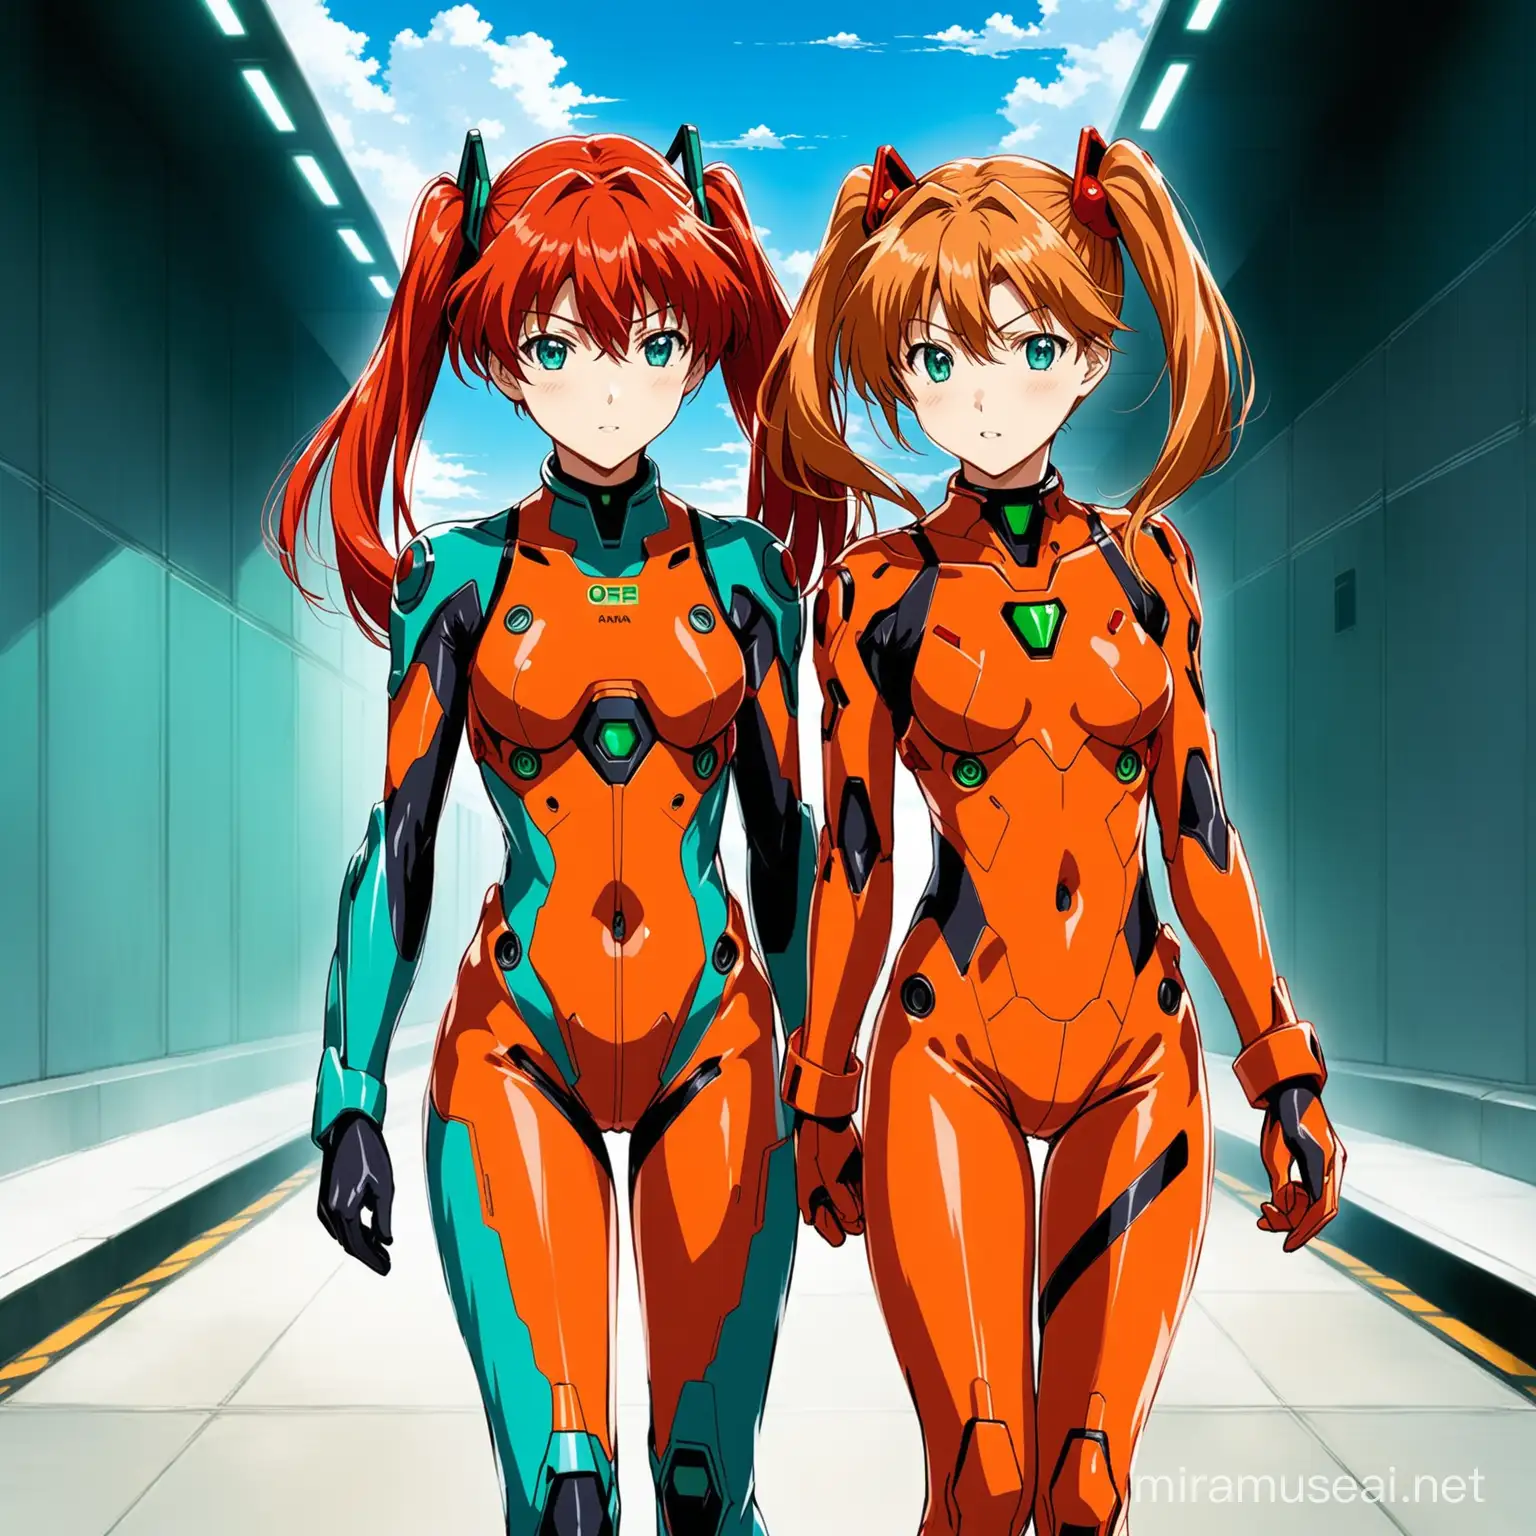 picture of two females walking alongside each other, one of them is is Asuka Langley Soryu from Evangelion Genesis in her iconic orange plugsuit and red hair, the other one is Hatsune Miku with her iconic long teal ponytails and teal tie